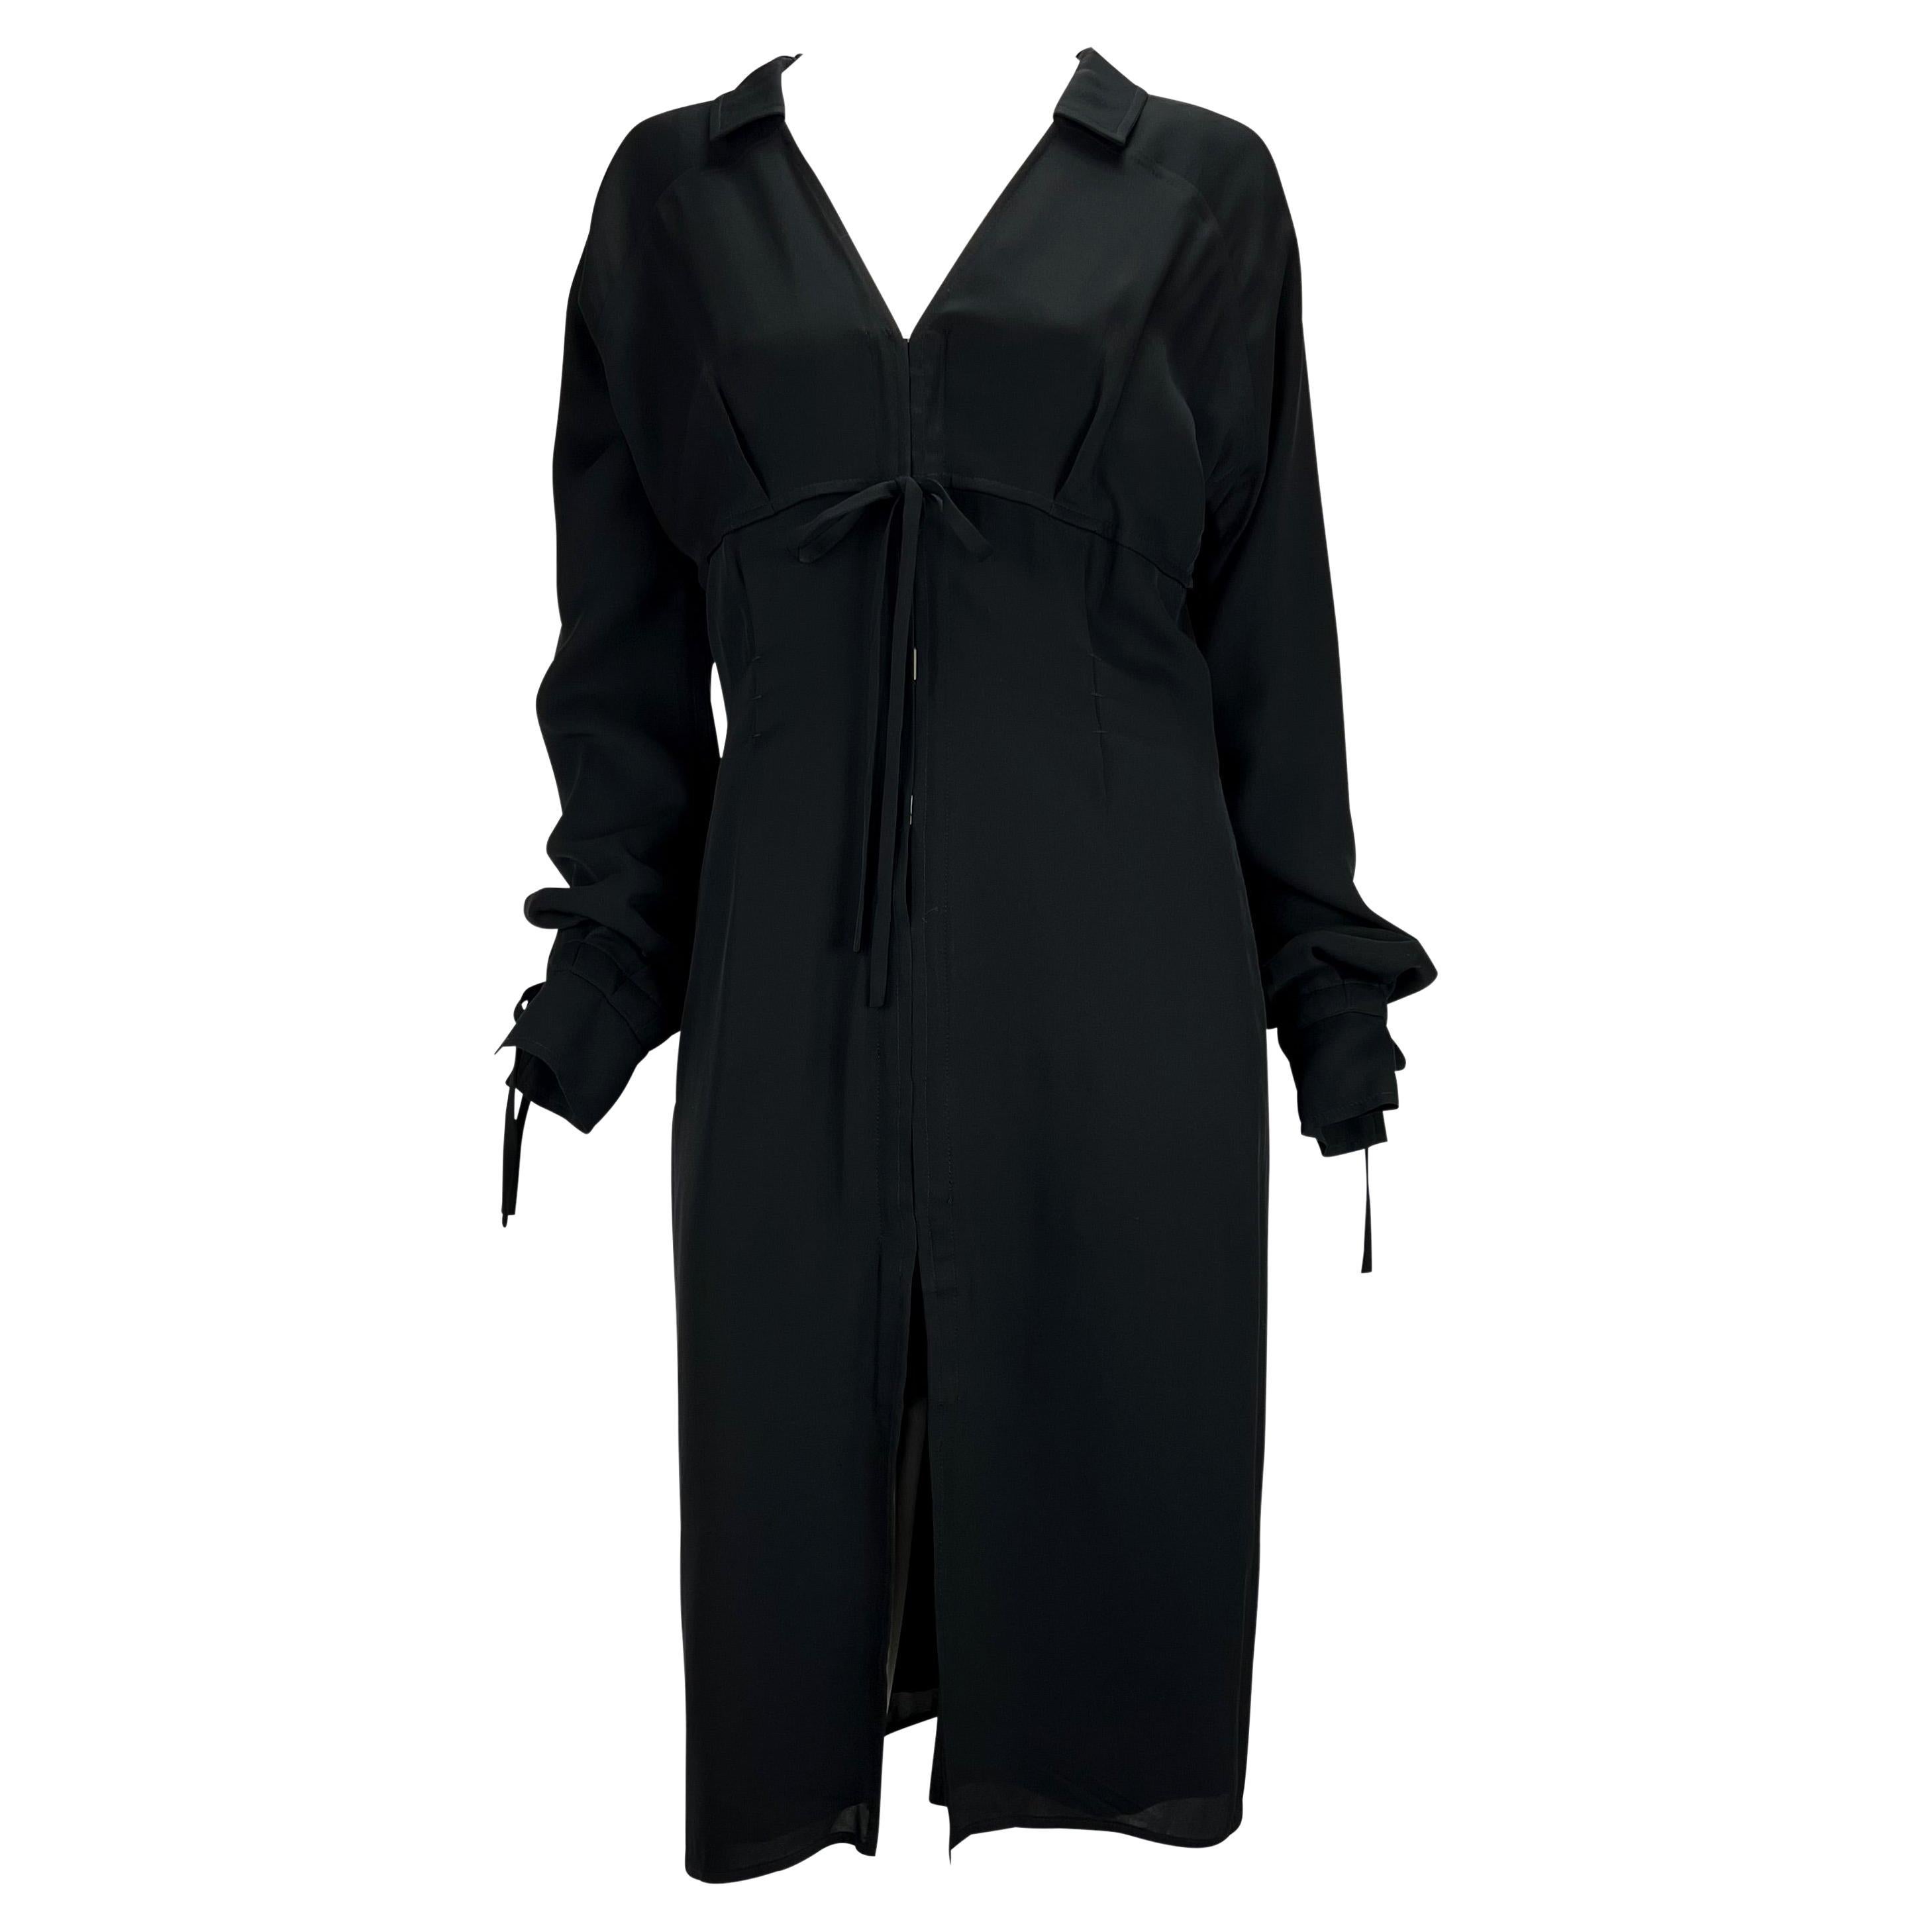 F/W 2001 Yves Saint Laurent by Tom Ford Black Silk Tie Up Shirt Dress For Sale